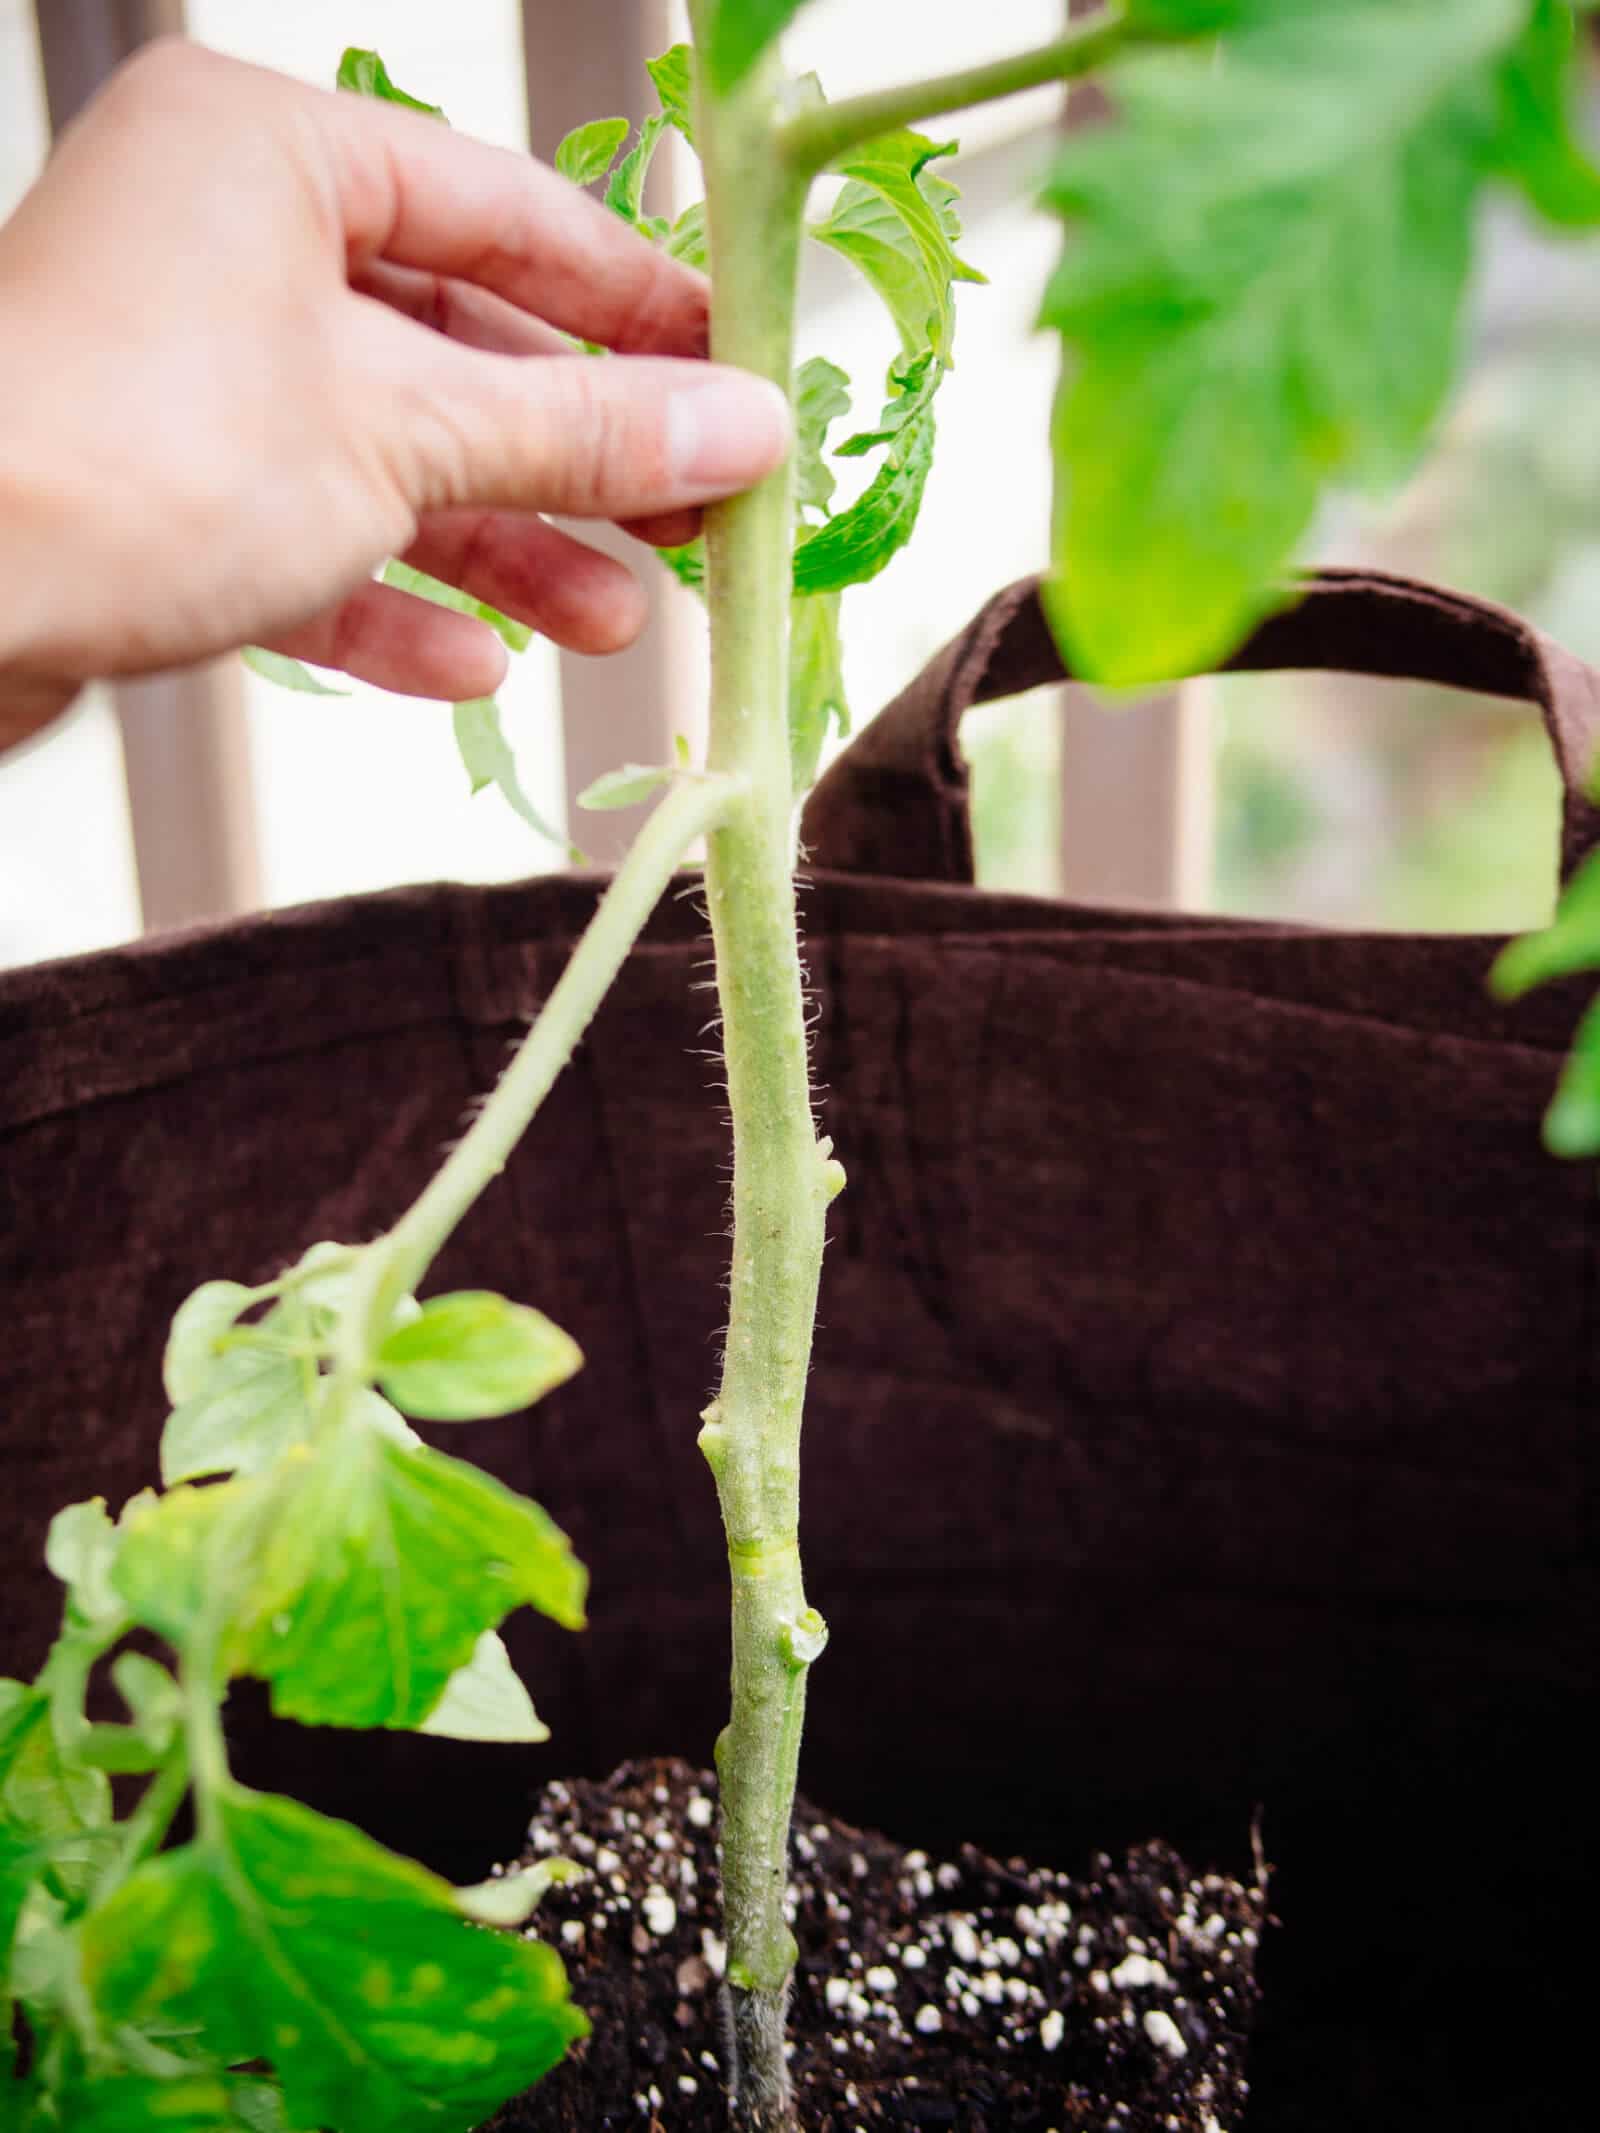 Bury the stem of the tomato plant when transplanting